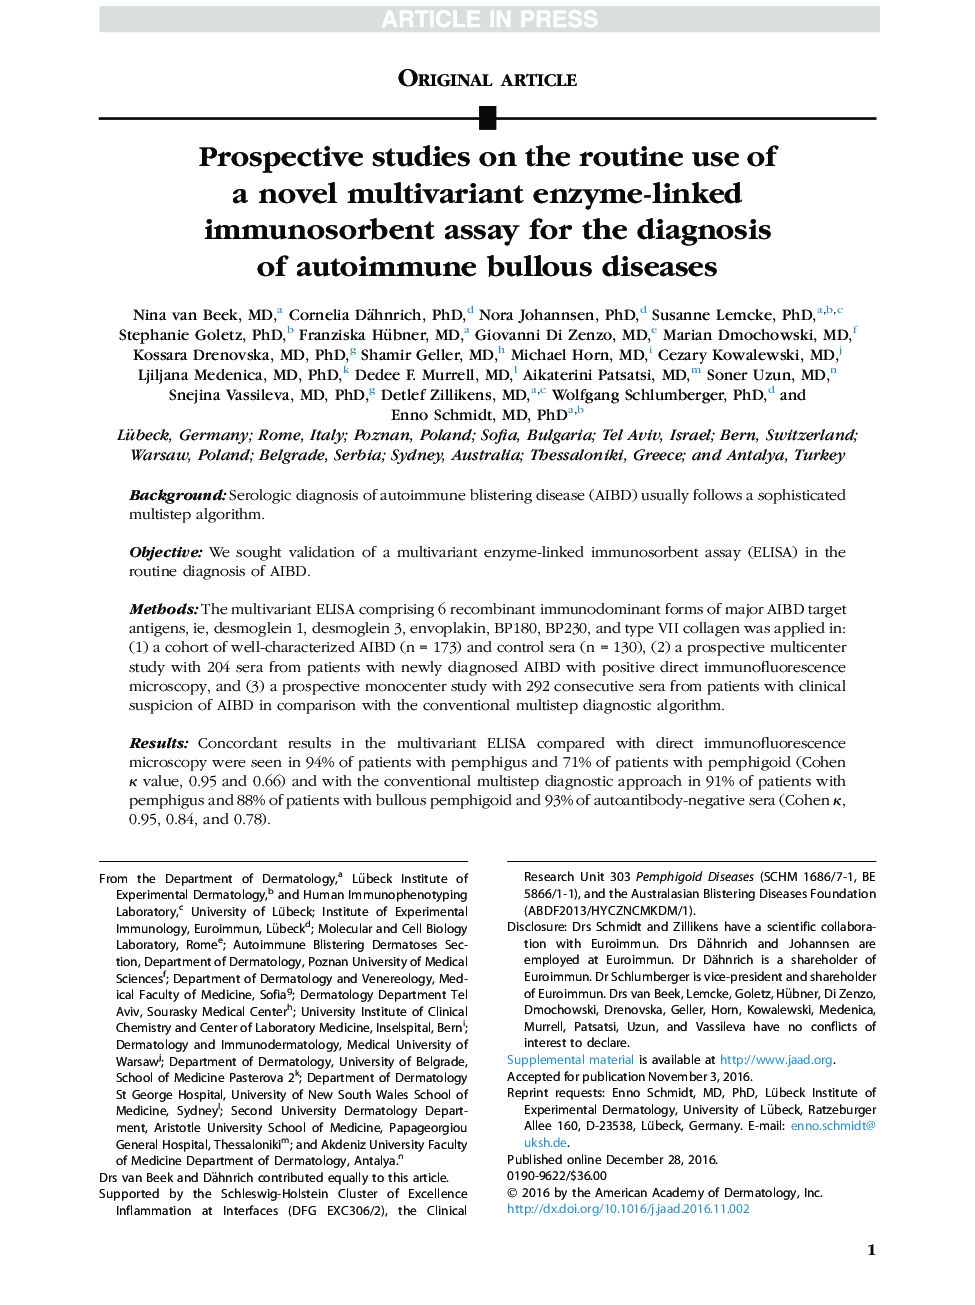 Prospective studies on the routine use of a novel multivariant enzyme-linked immunosorbent assay for the diagnosis of autoimmune bullous diseases